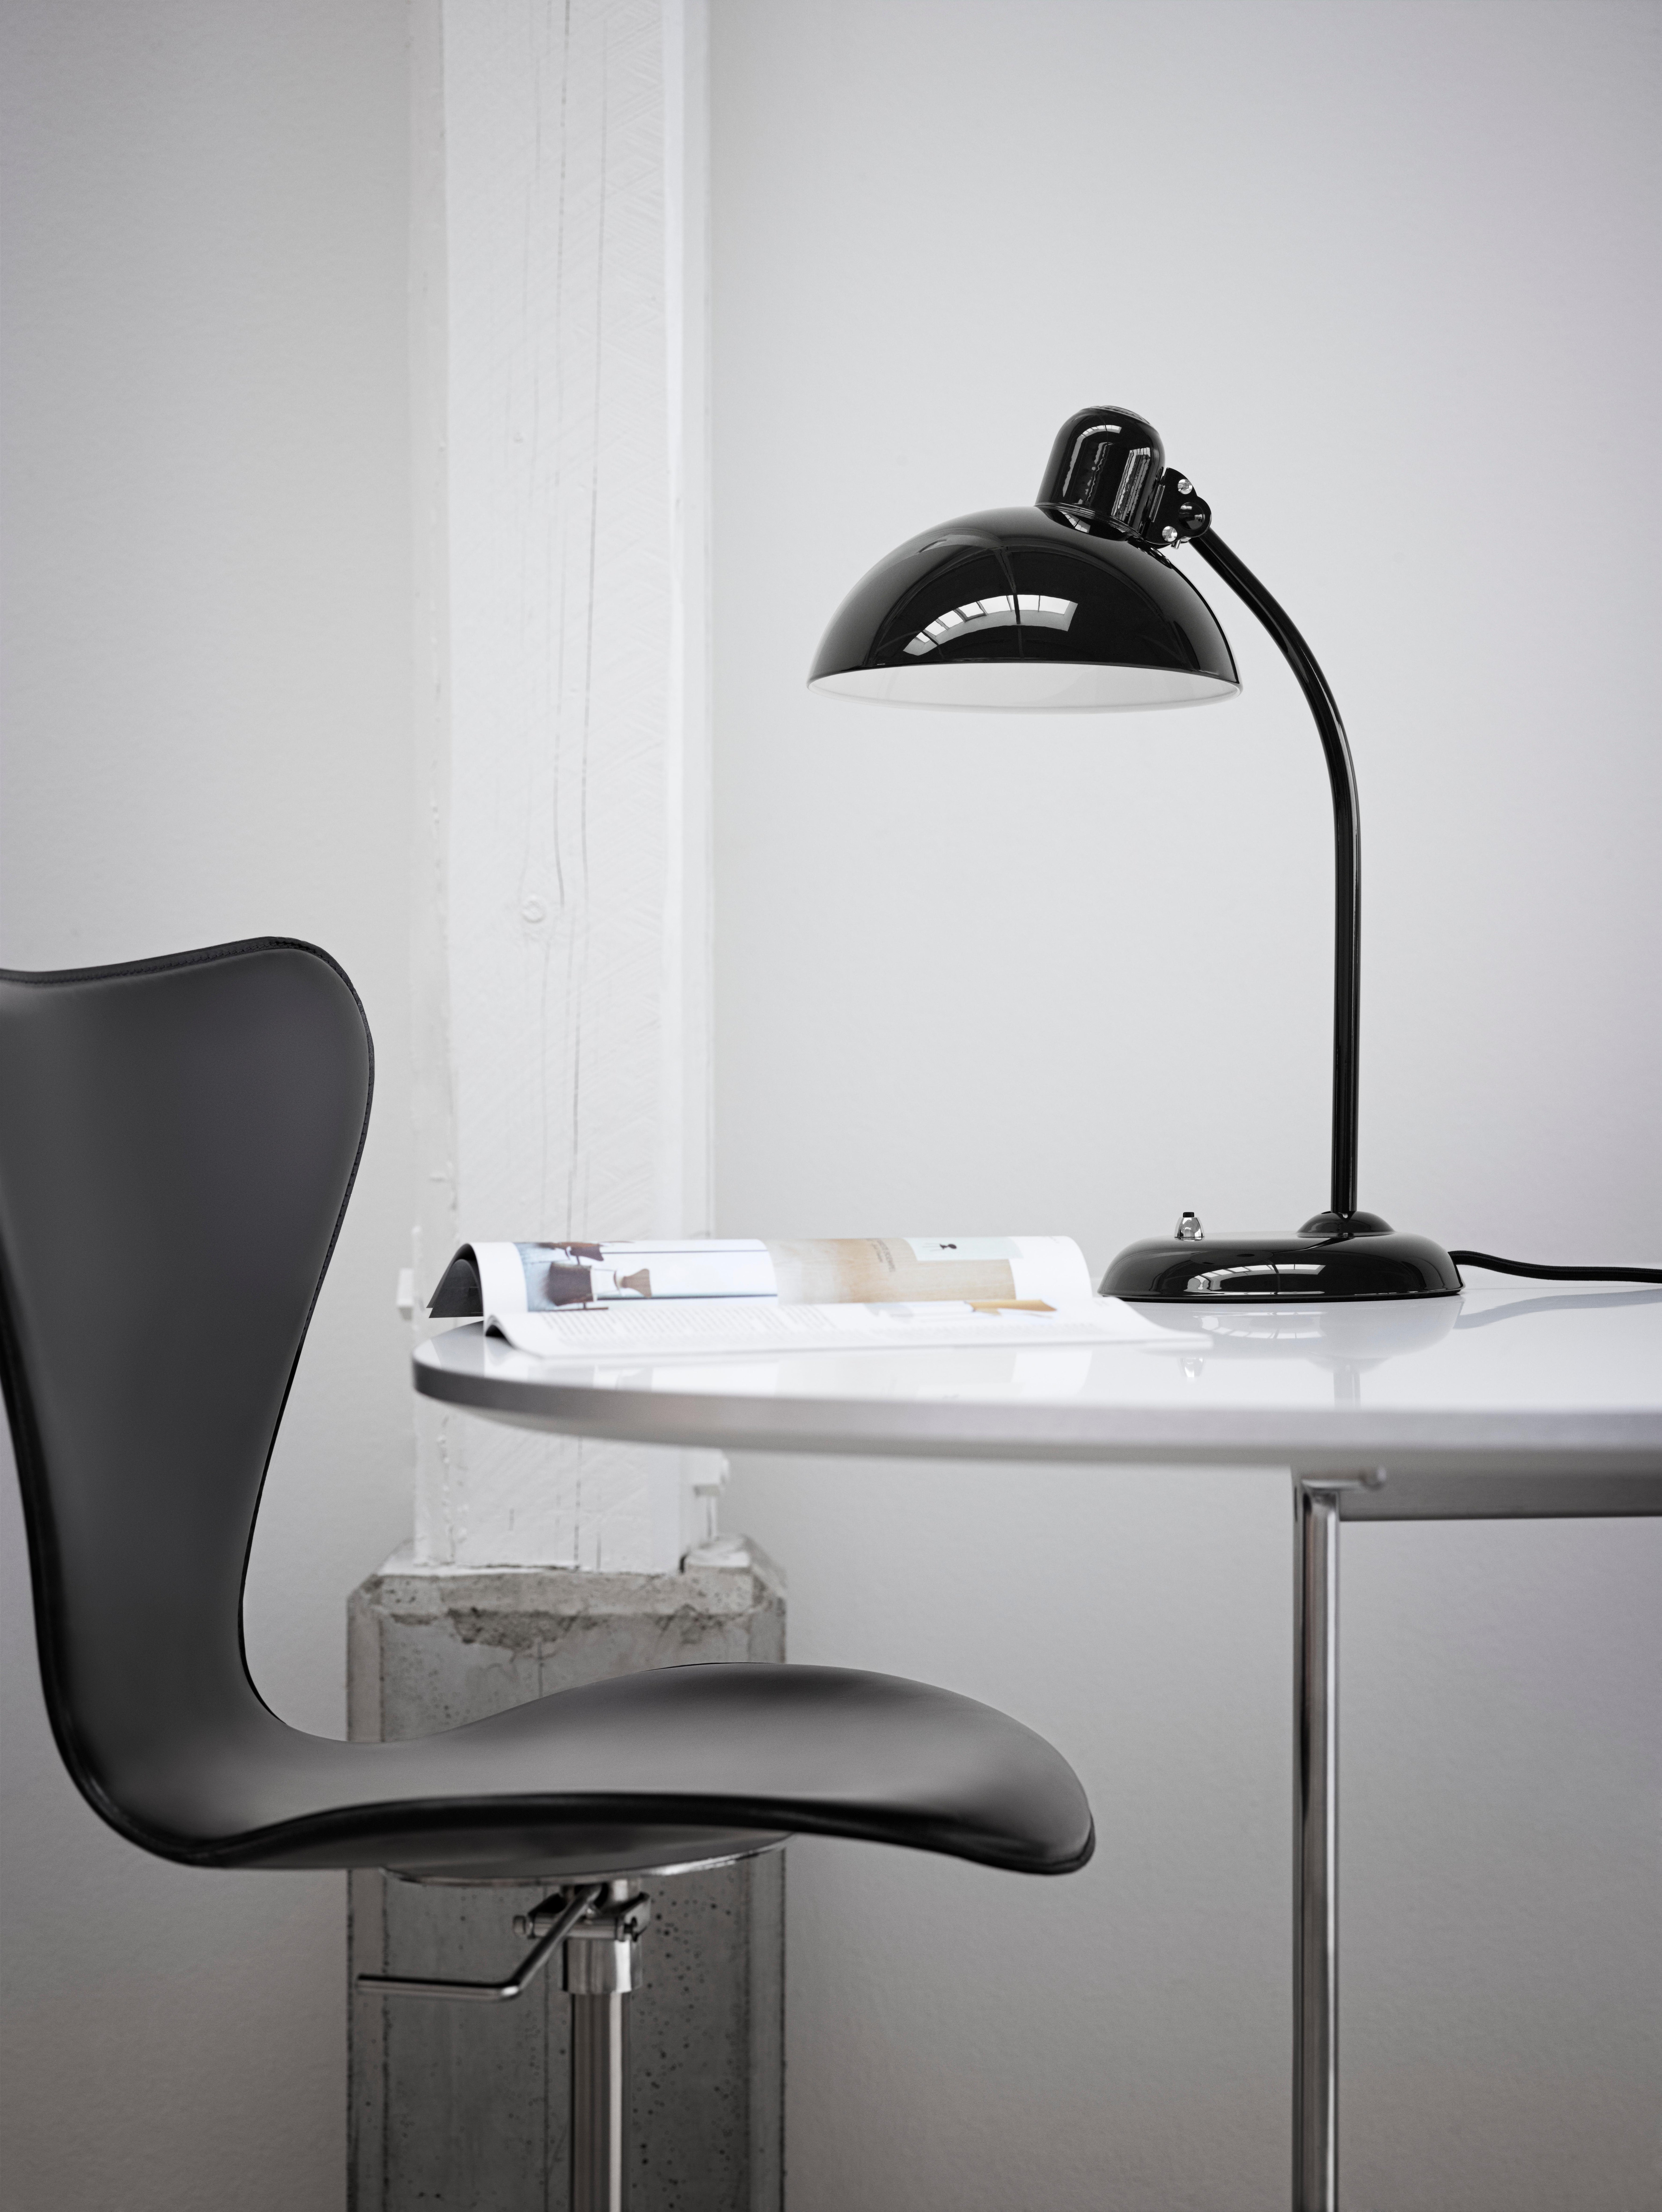 Christian Dell 'Kaiser Idell 6556-T' Table Lamp for Fritz Hansen in Gloss Black.

 Established in 1872, Fritz Hansen has become synonymous with legendary Danish design. Combining timeless craftsmanship with an emphasis on sustainability, the brand’s